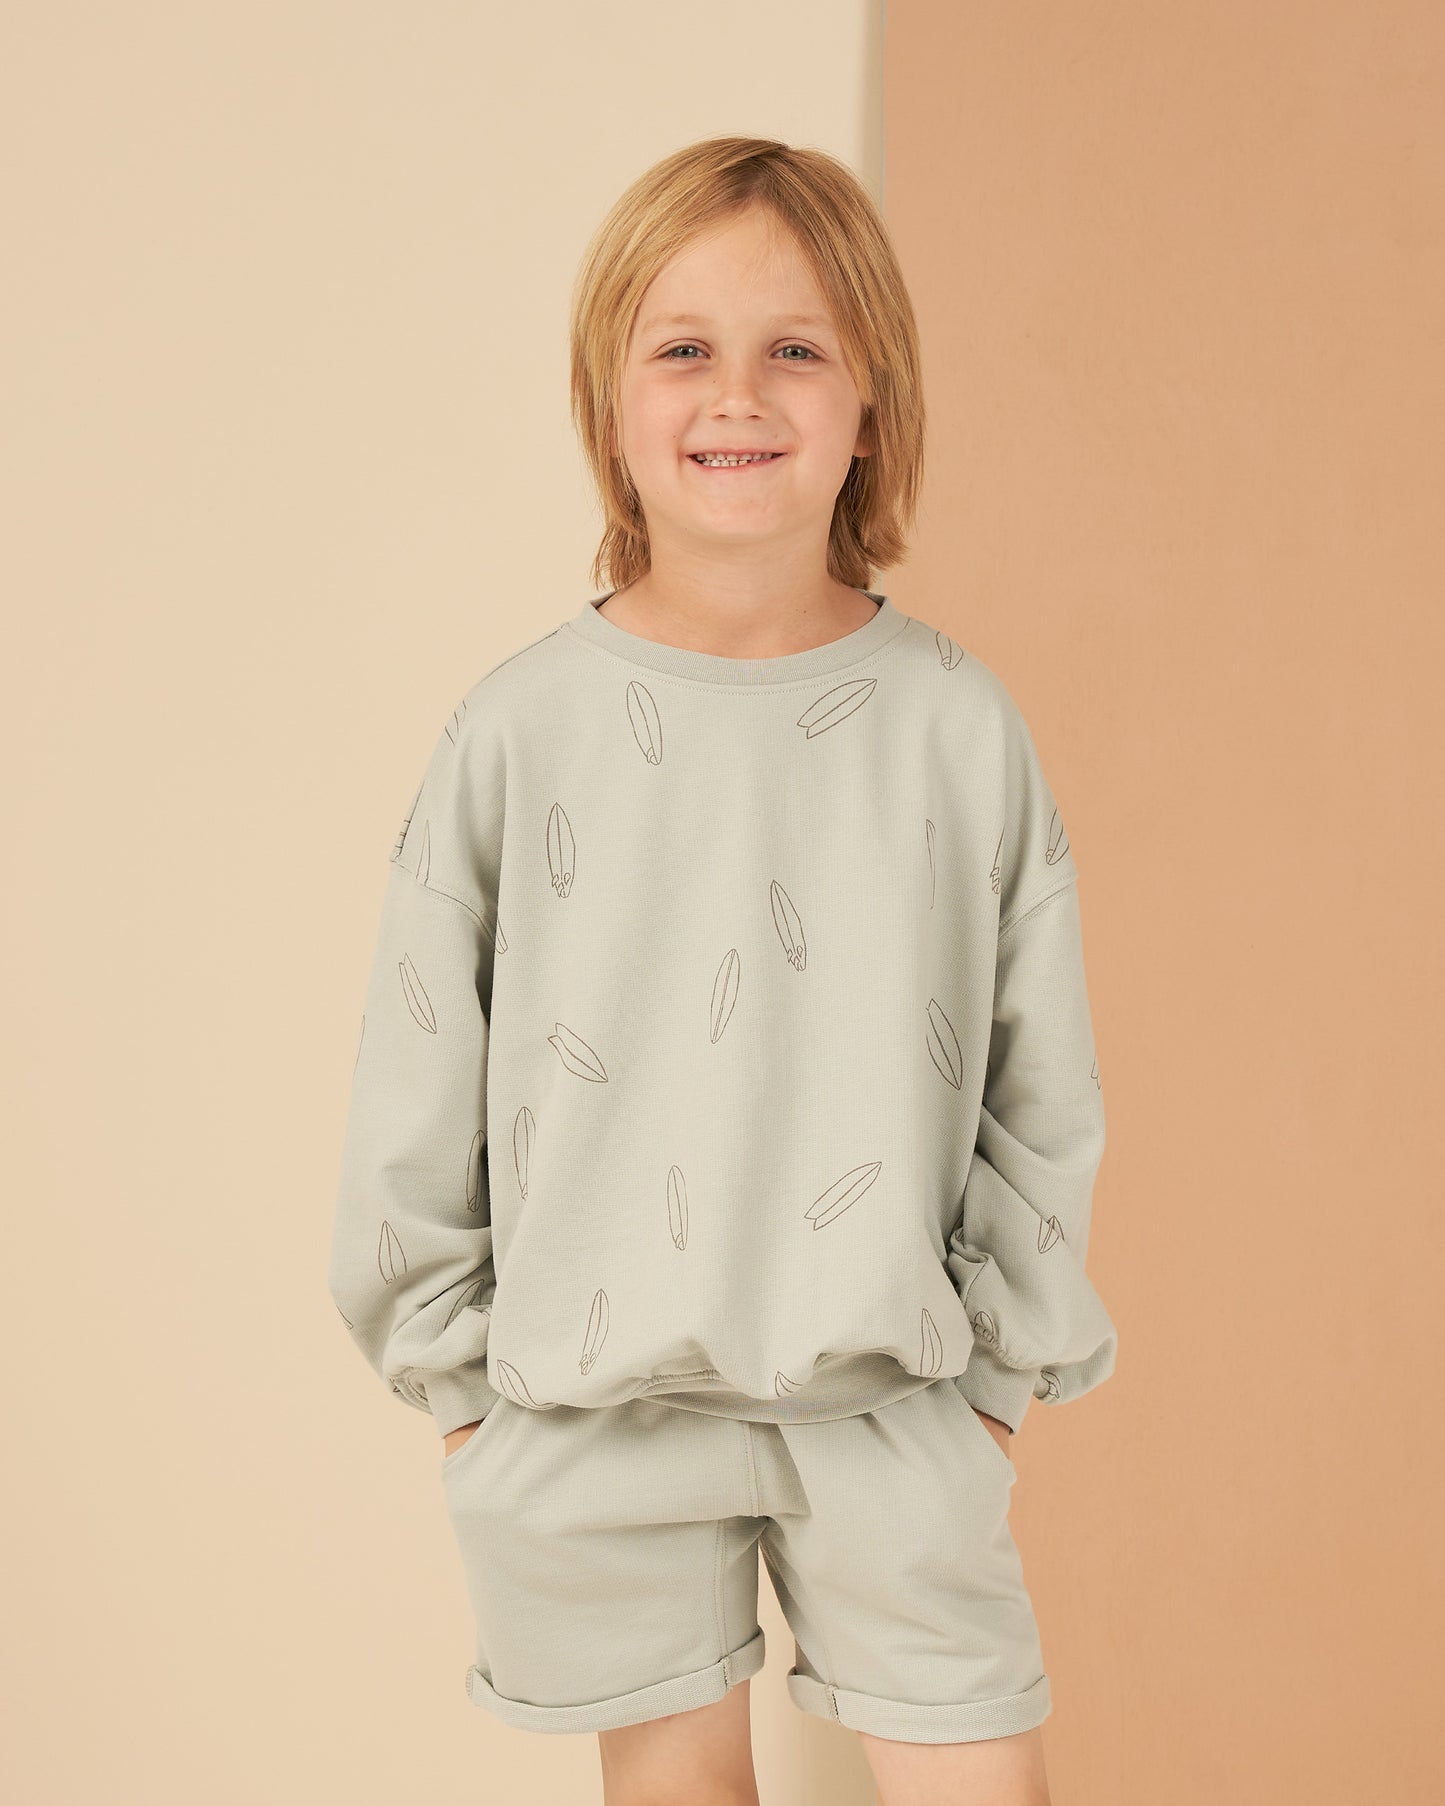 Sweatshirt || Surfboard - Rylee + Cru | Kids Clothes | Trendy Baby Clothes | Modern Infant Outfits |